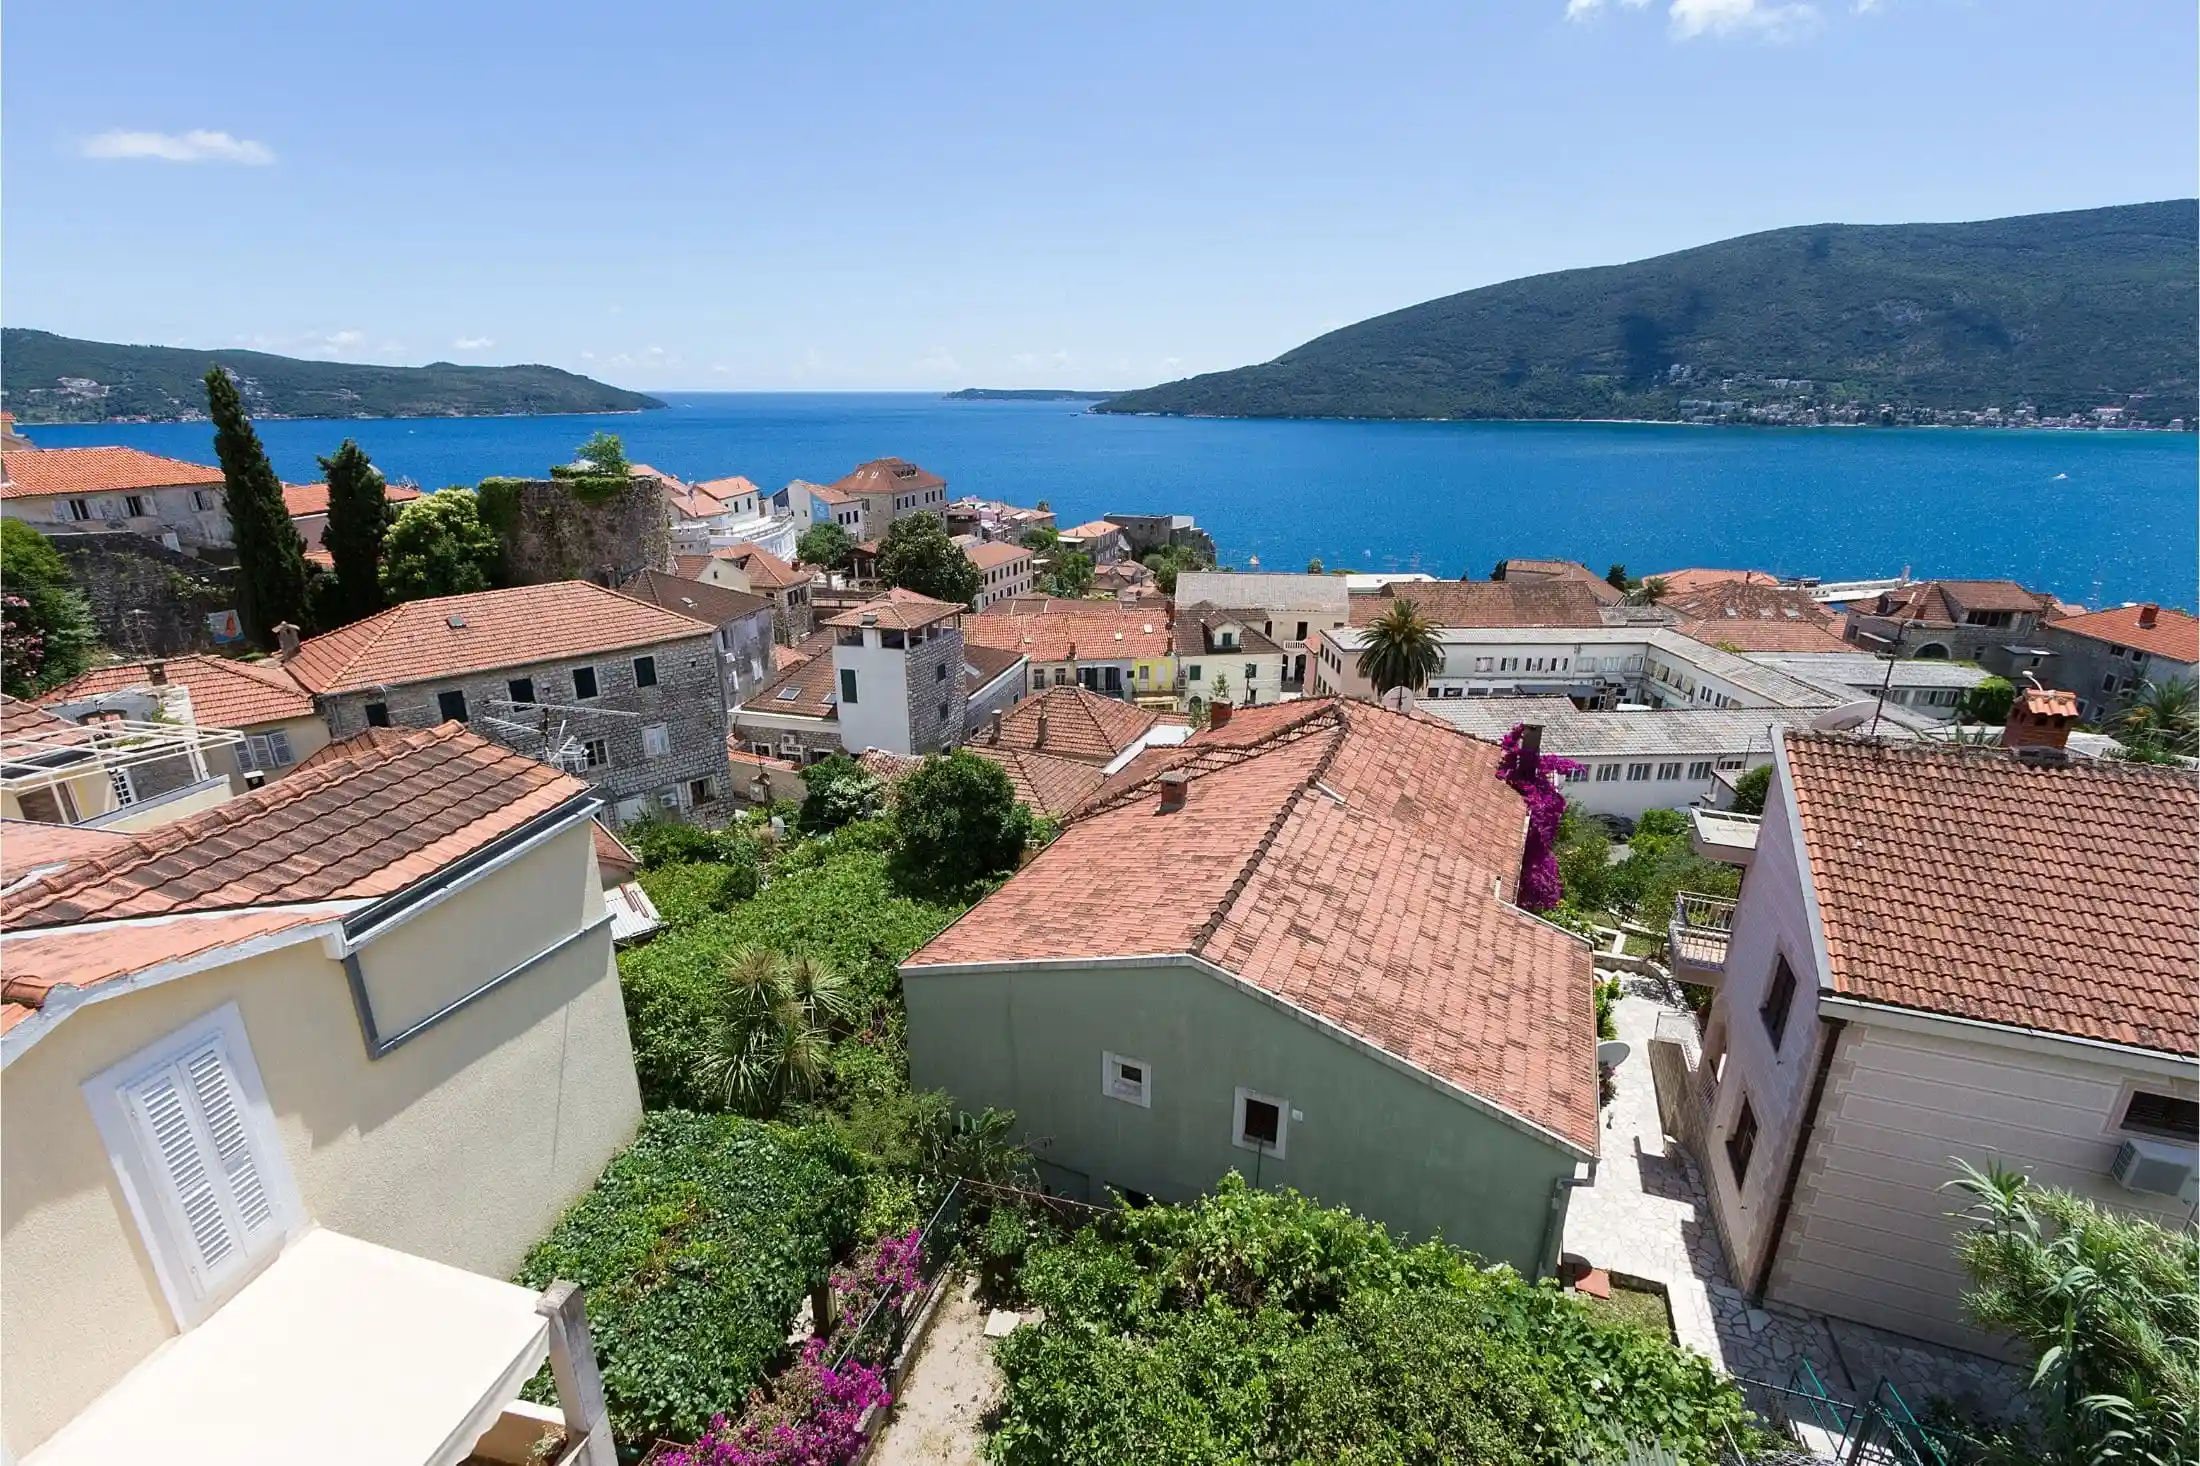 A photo of Herceg Novi overlooking the entrance to the Bay of Kotor